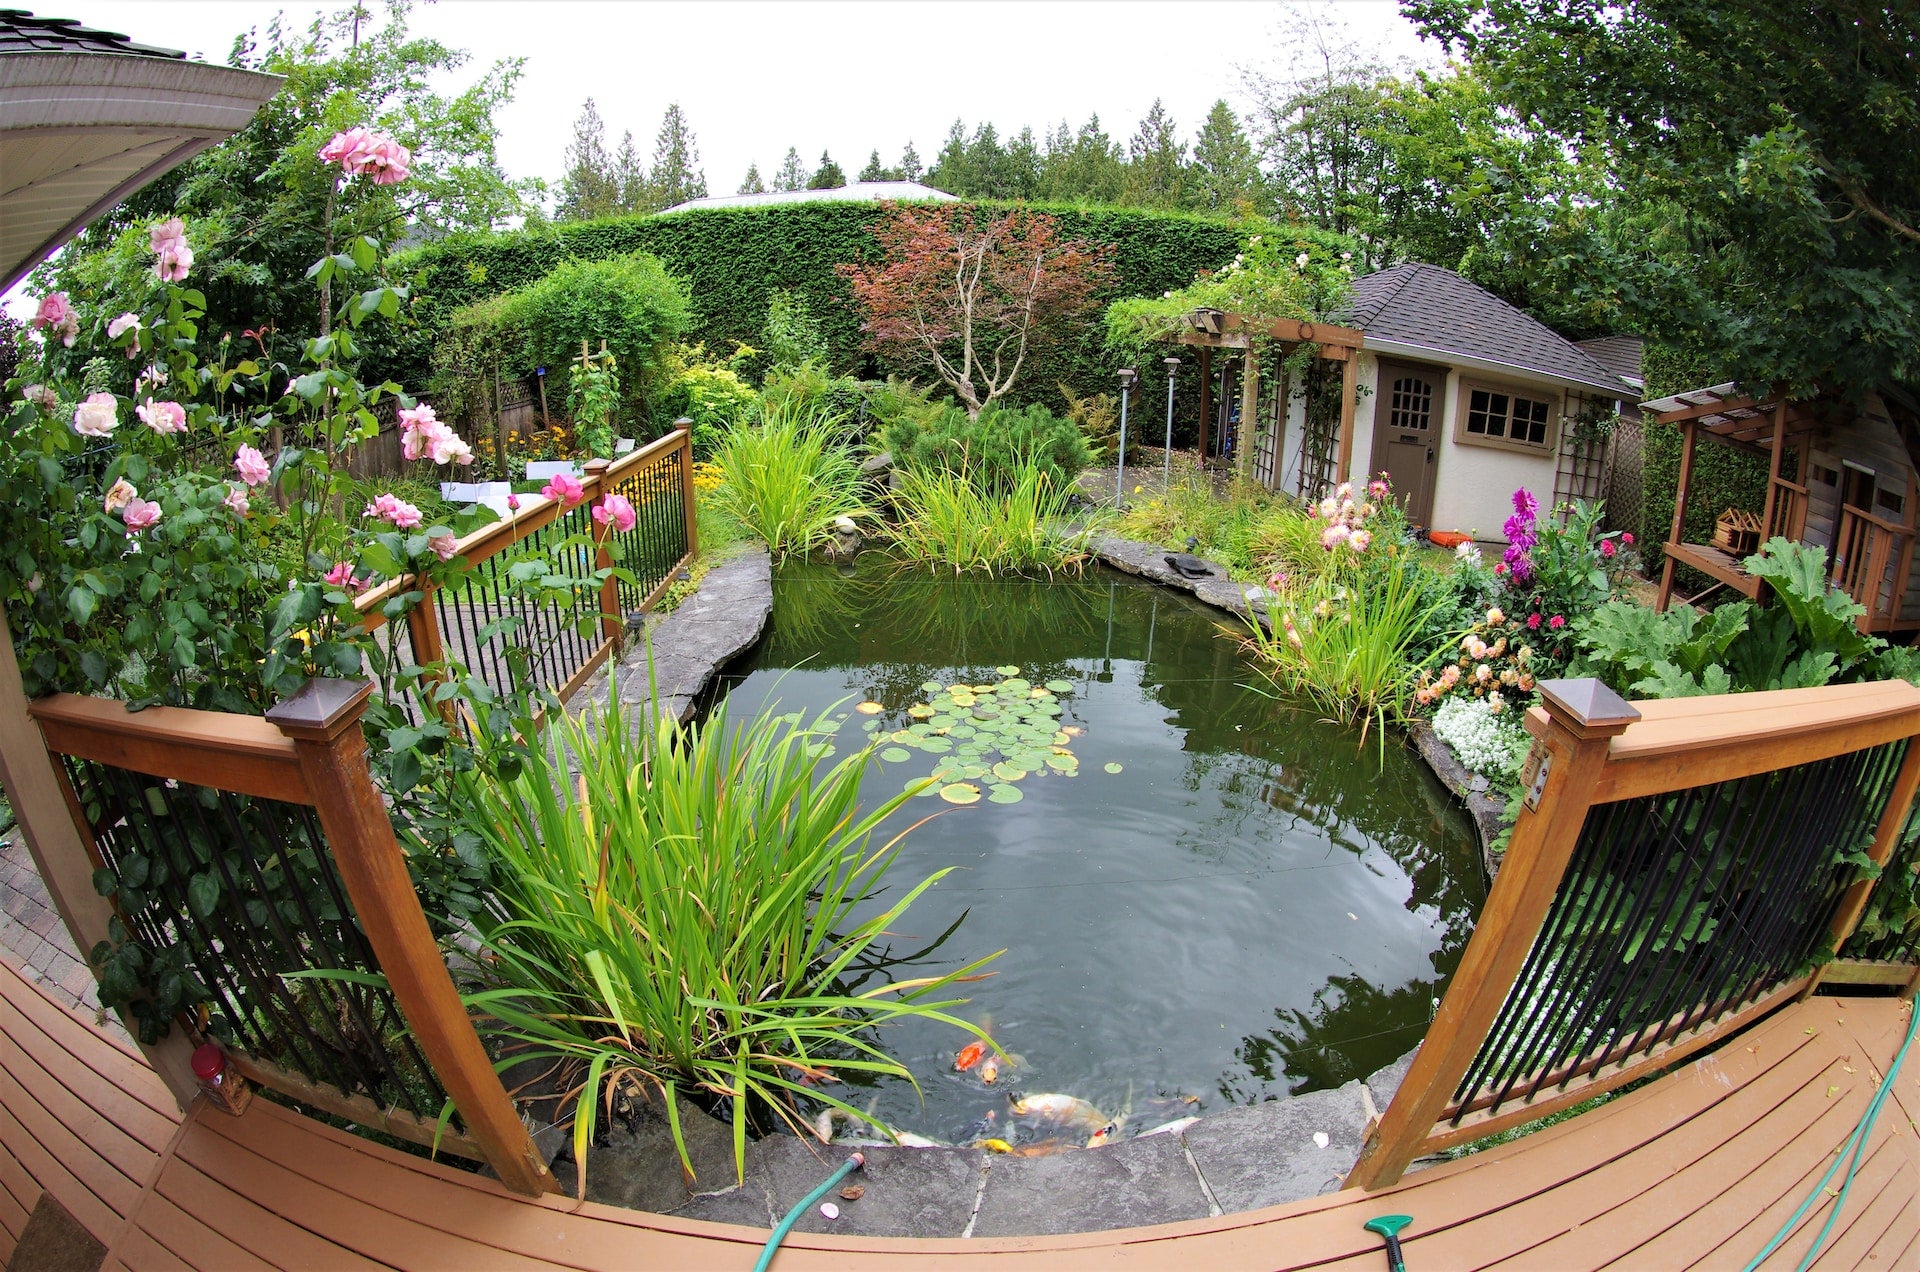 Garden pond with koi fish surrounded by plants and flowers